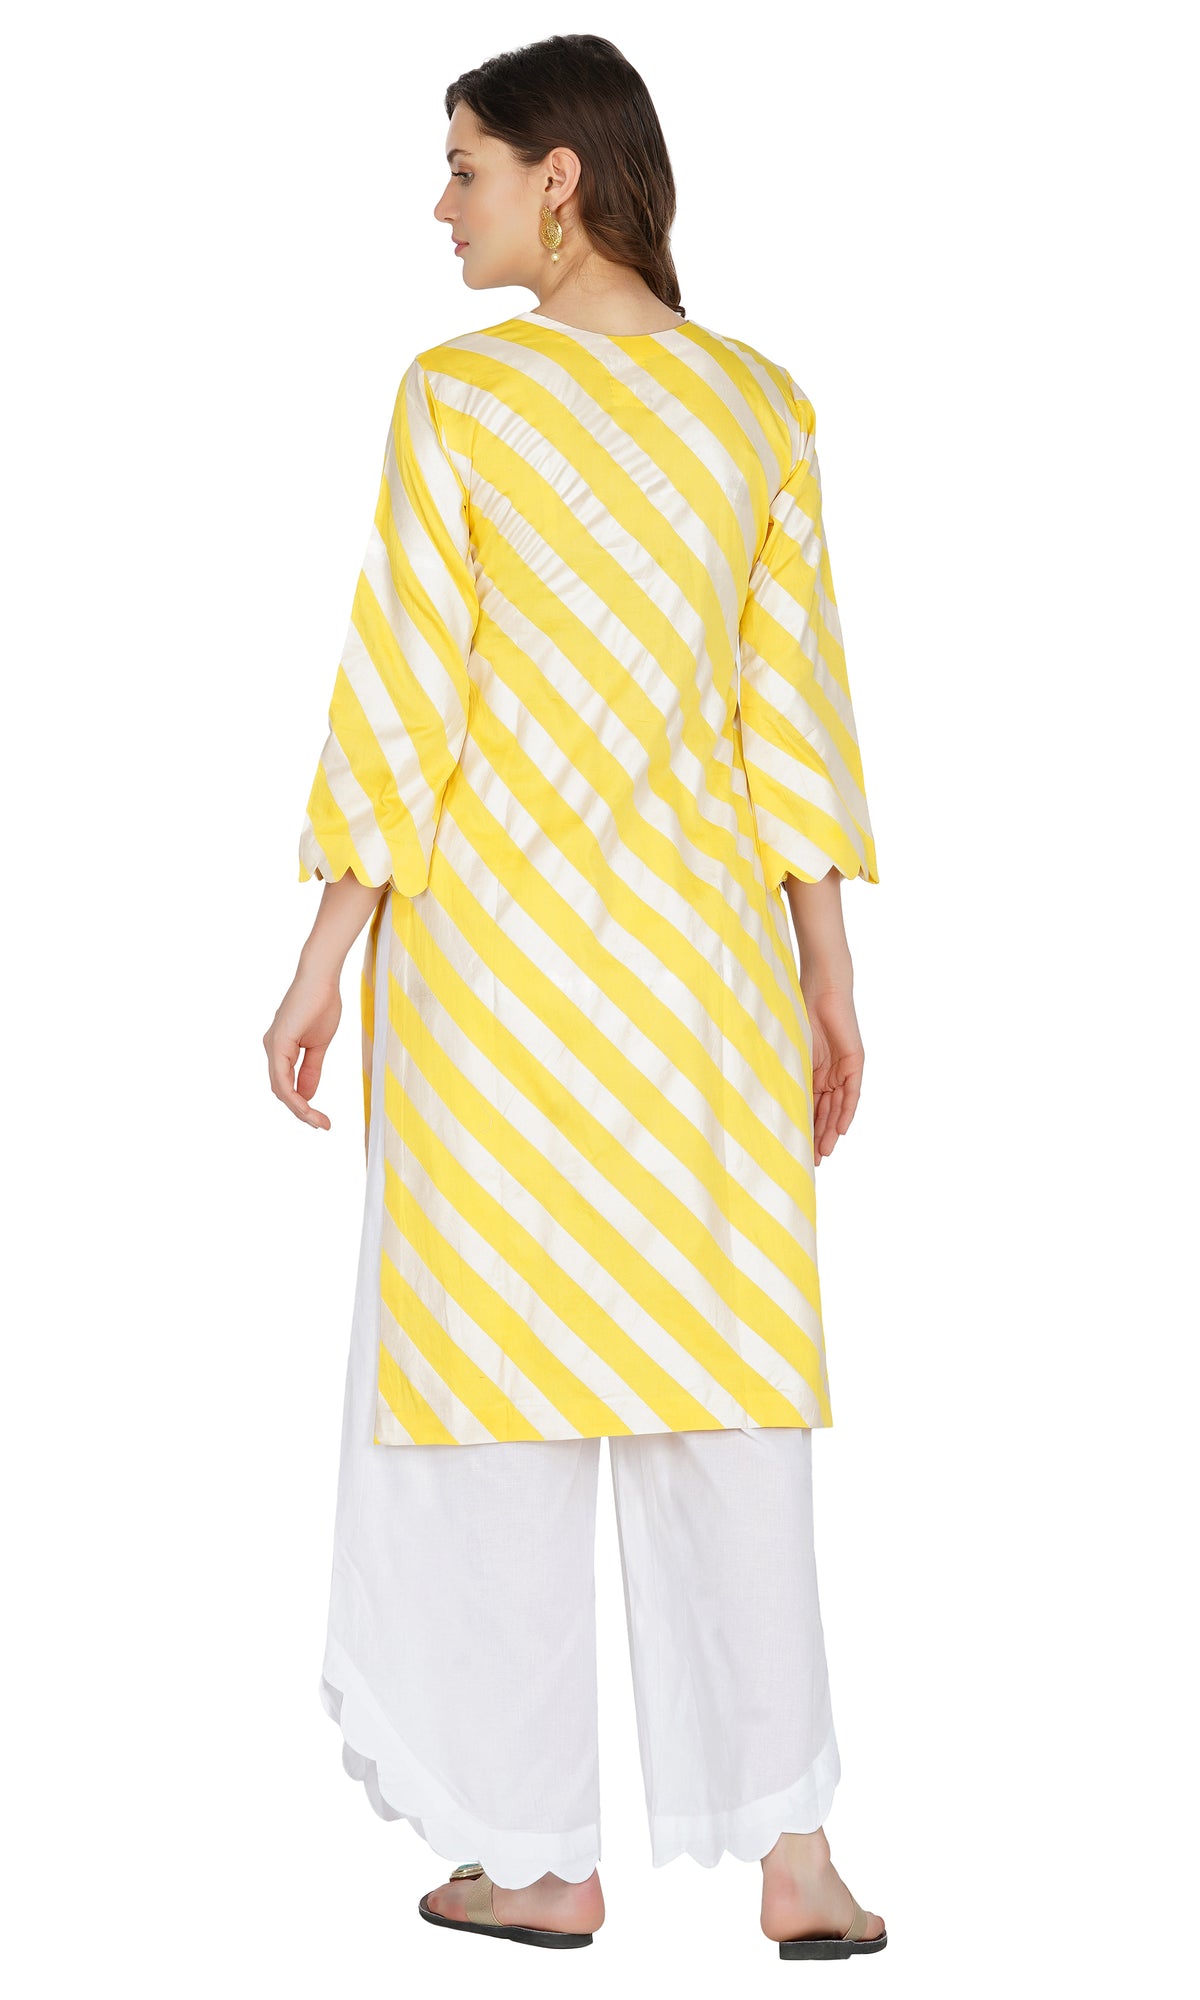 Yellow Striped Suit- Set of 3